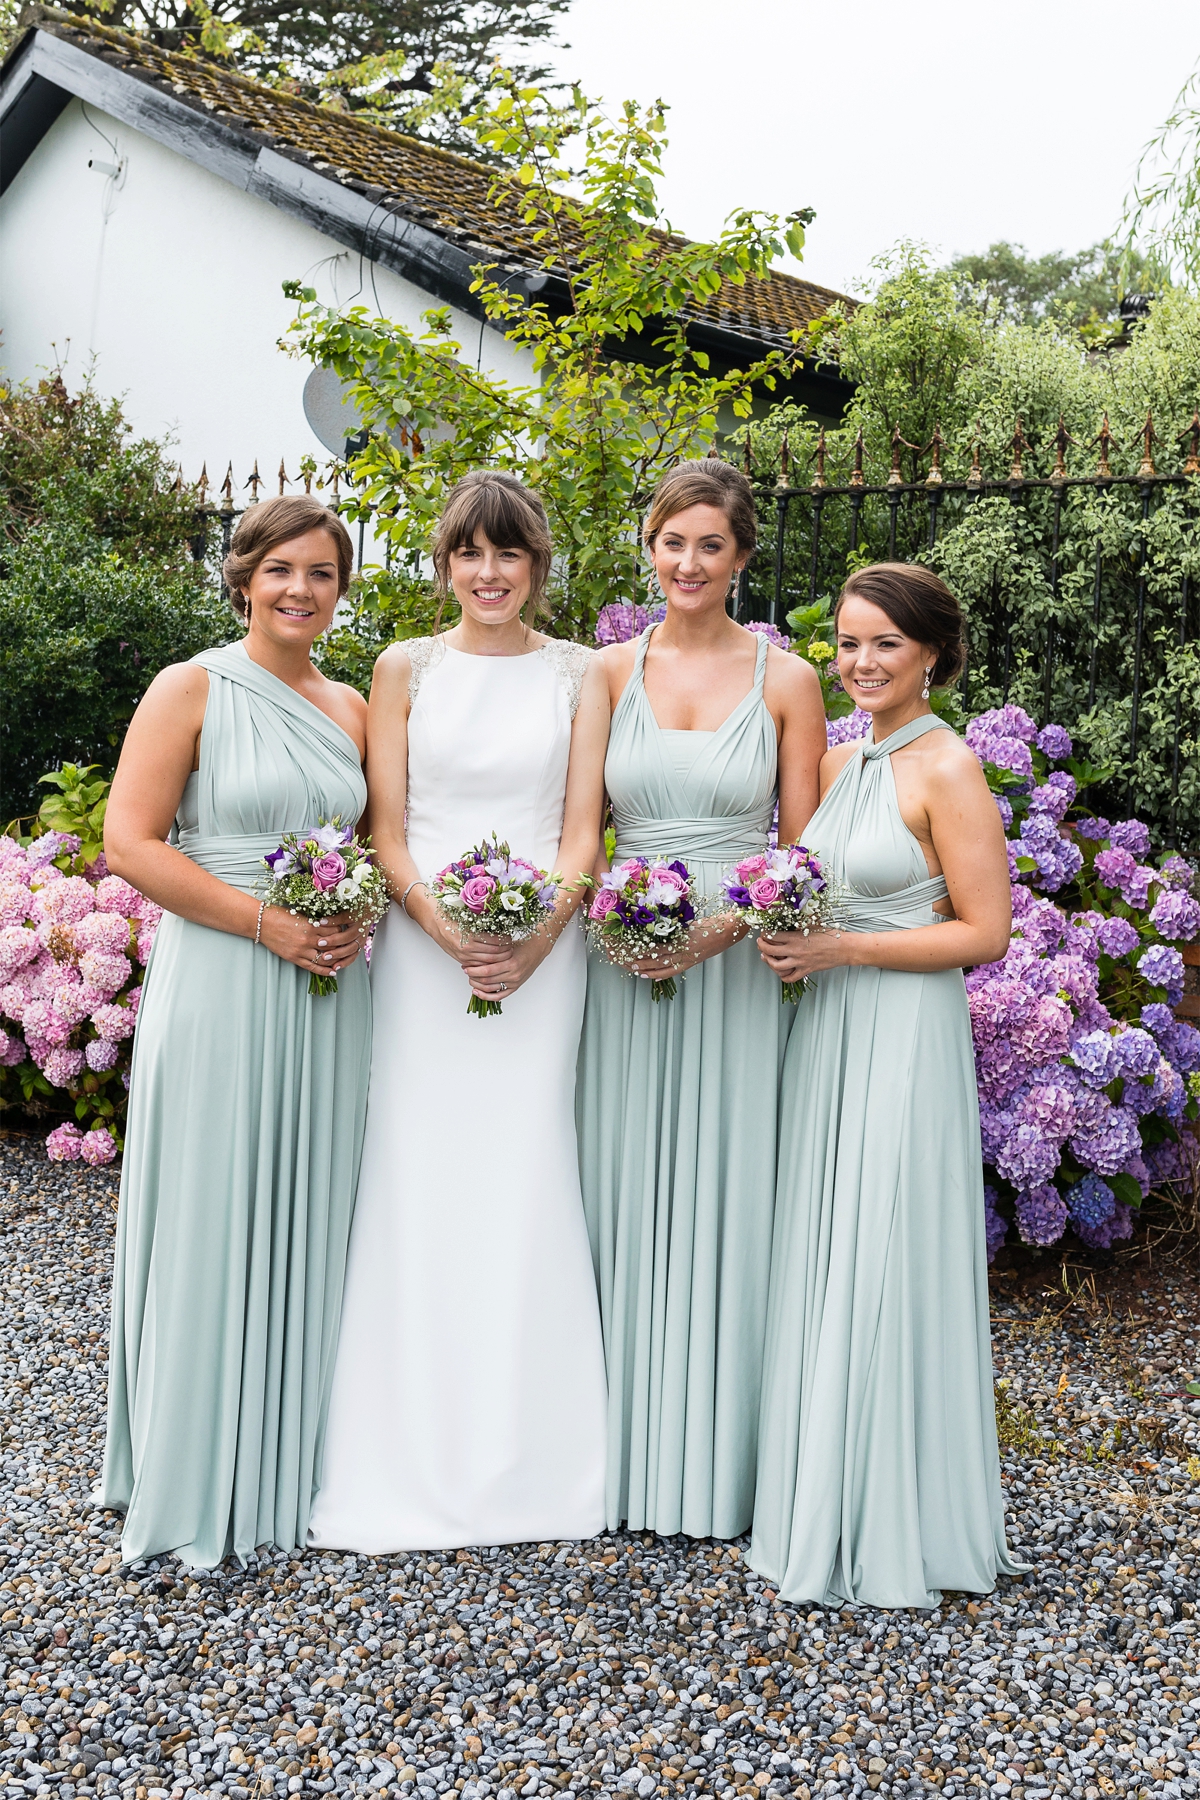 Bride wearing Pronovias and her maids in sage green dresses